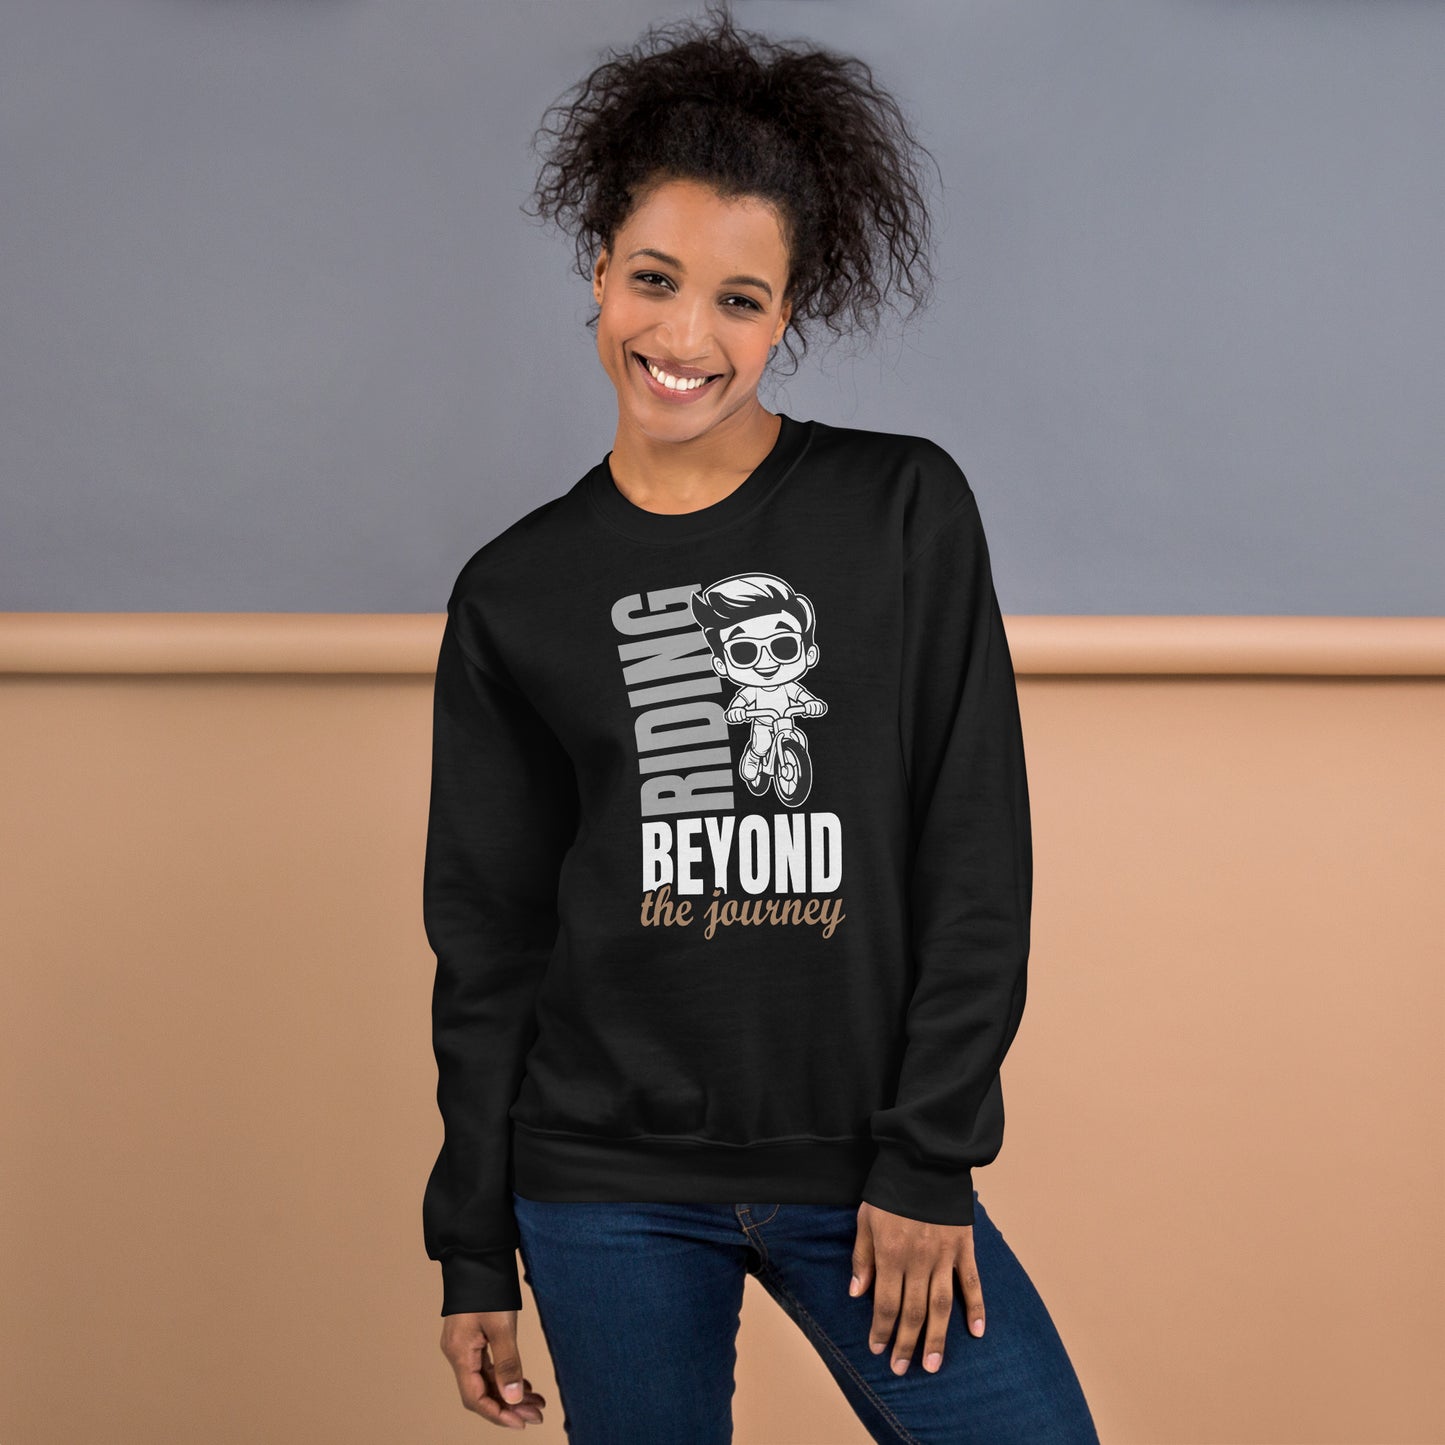 Riding beyond the journey Pullover